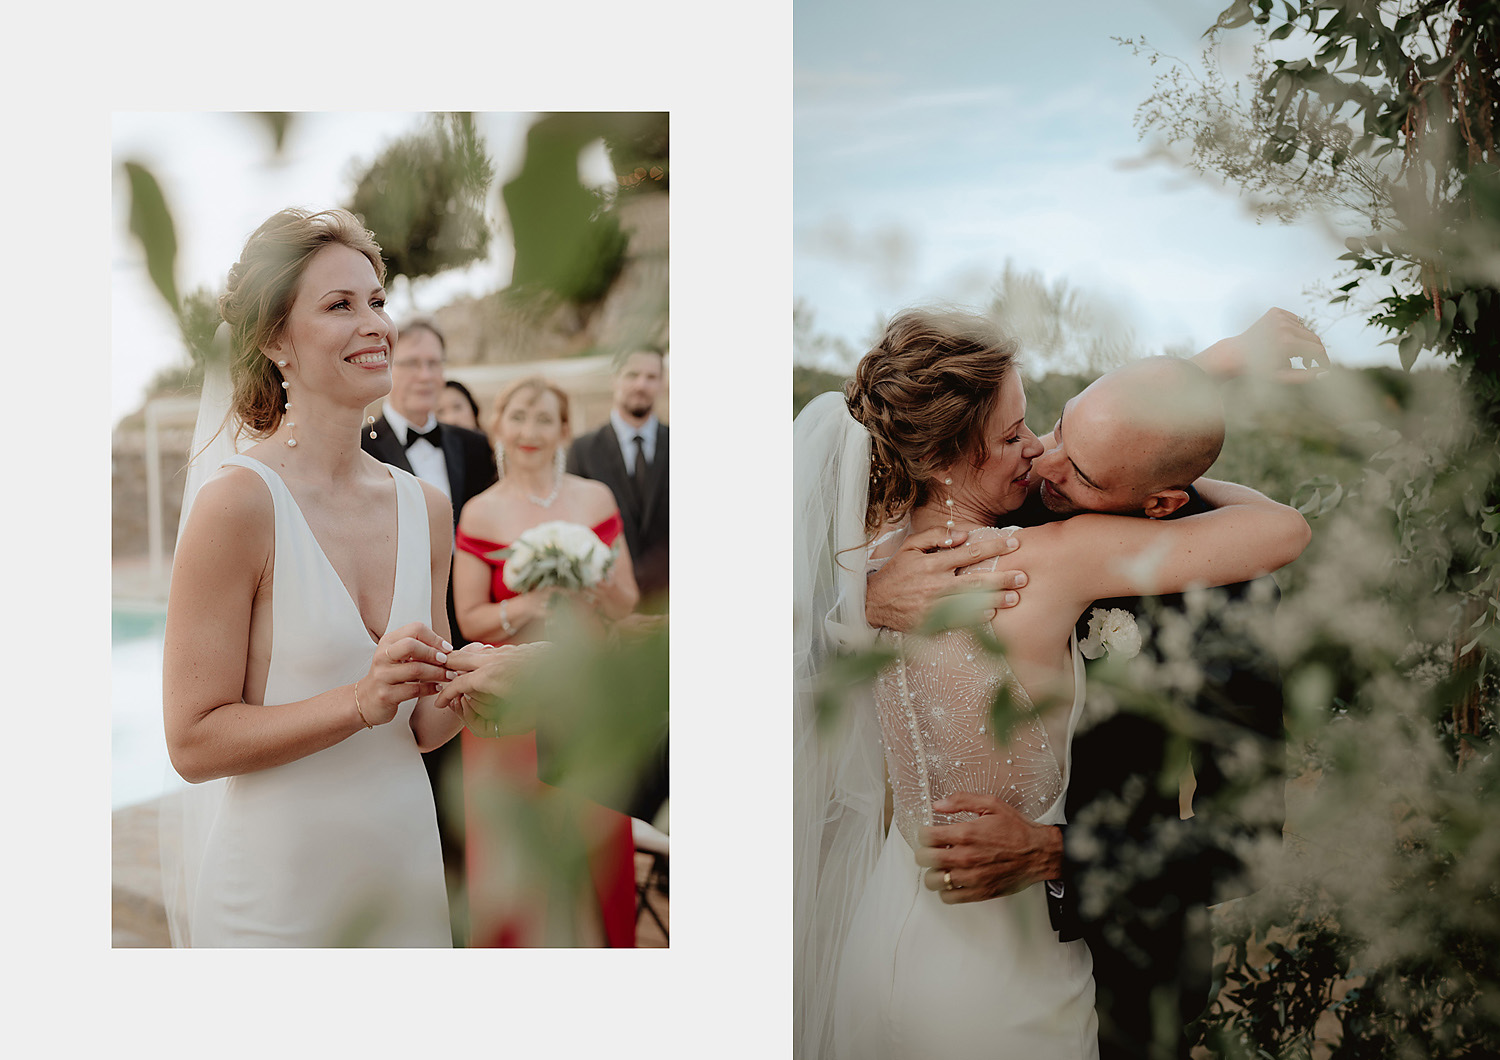 intimate micro wedding in tuscany rustic outdoor ceremony ring exchange photographs